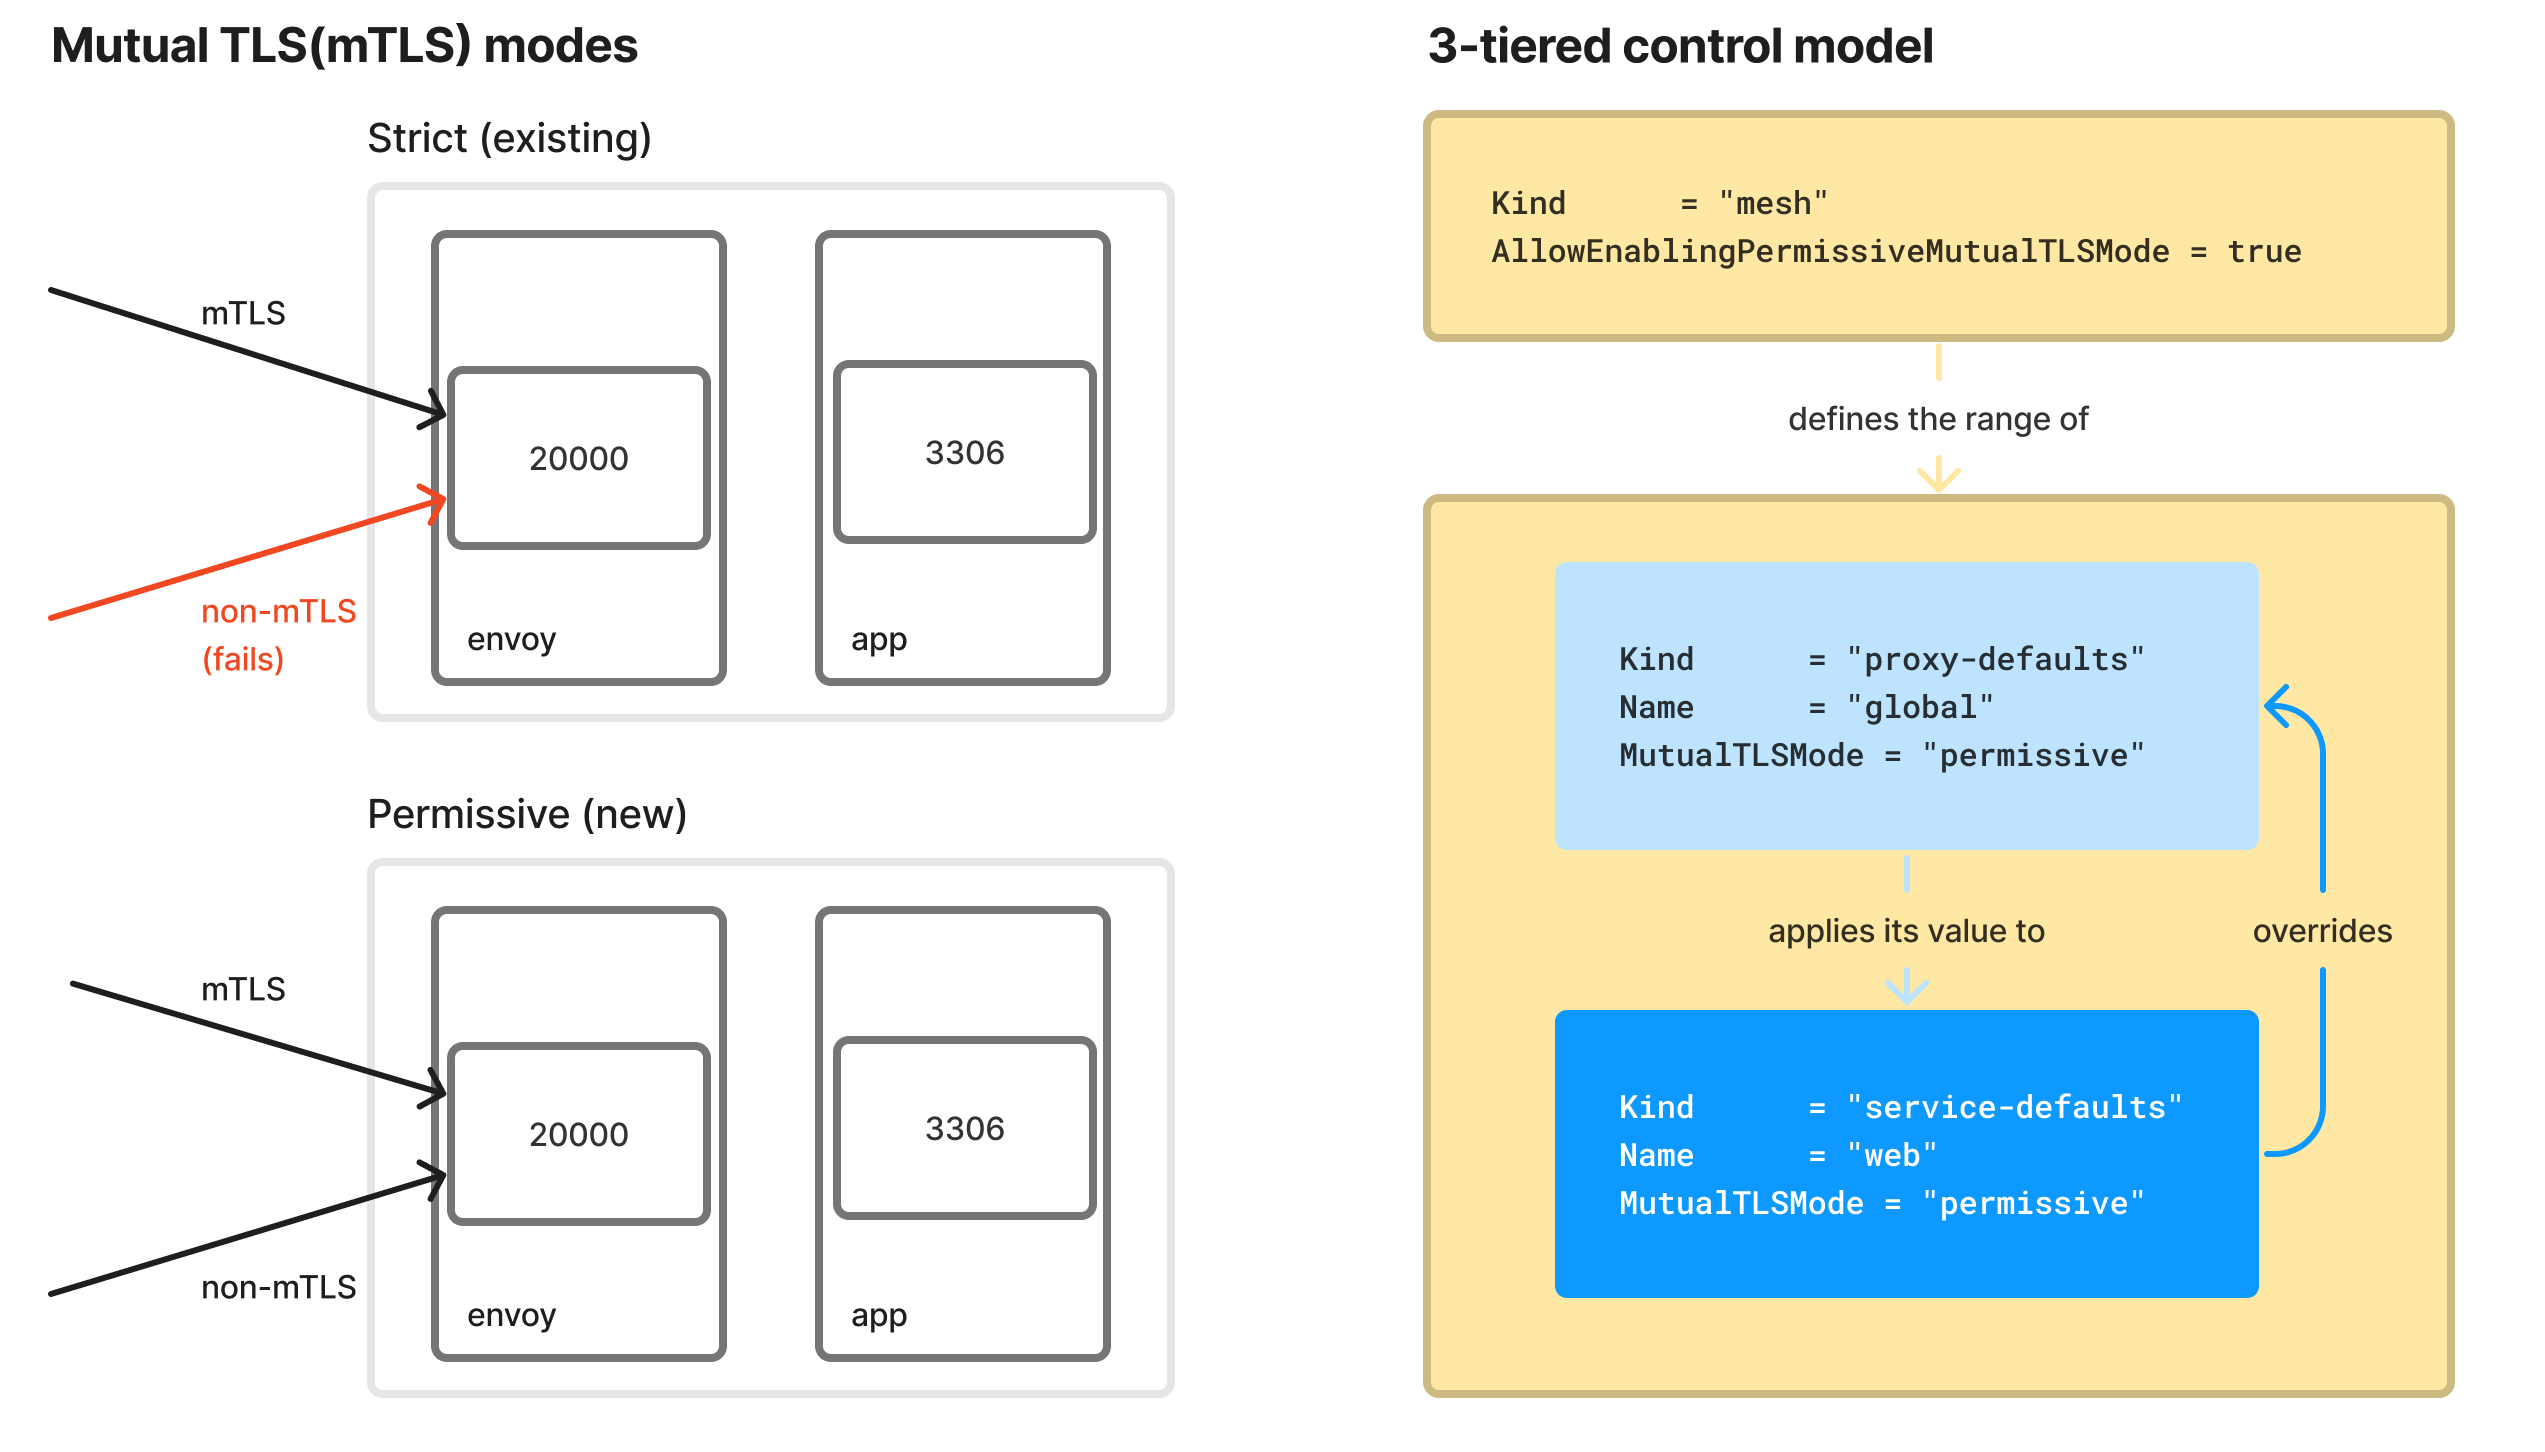 Mutual TLS modes and examples of how to control them on global and local levels